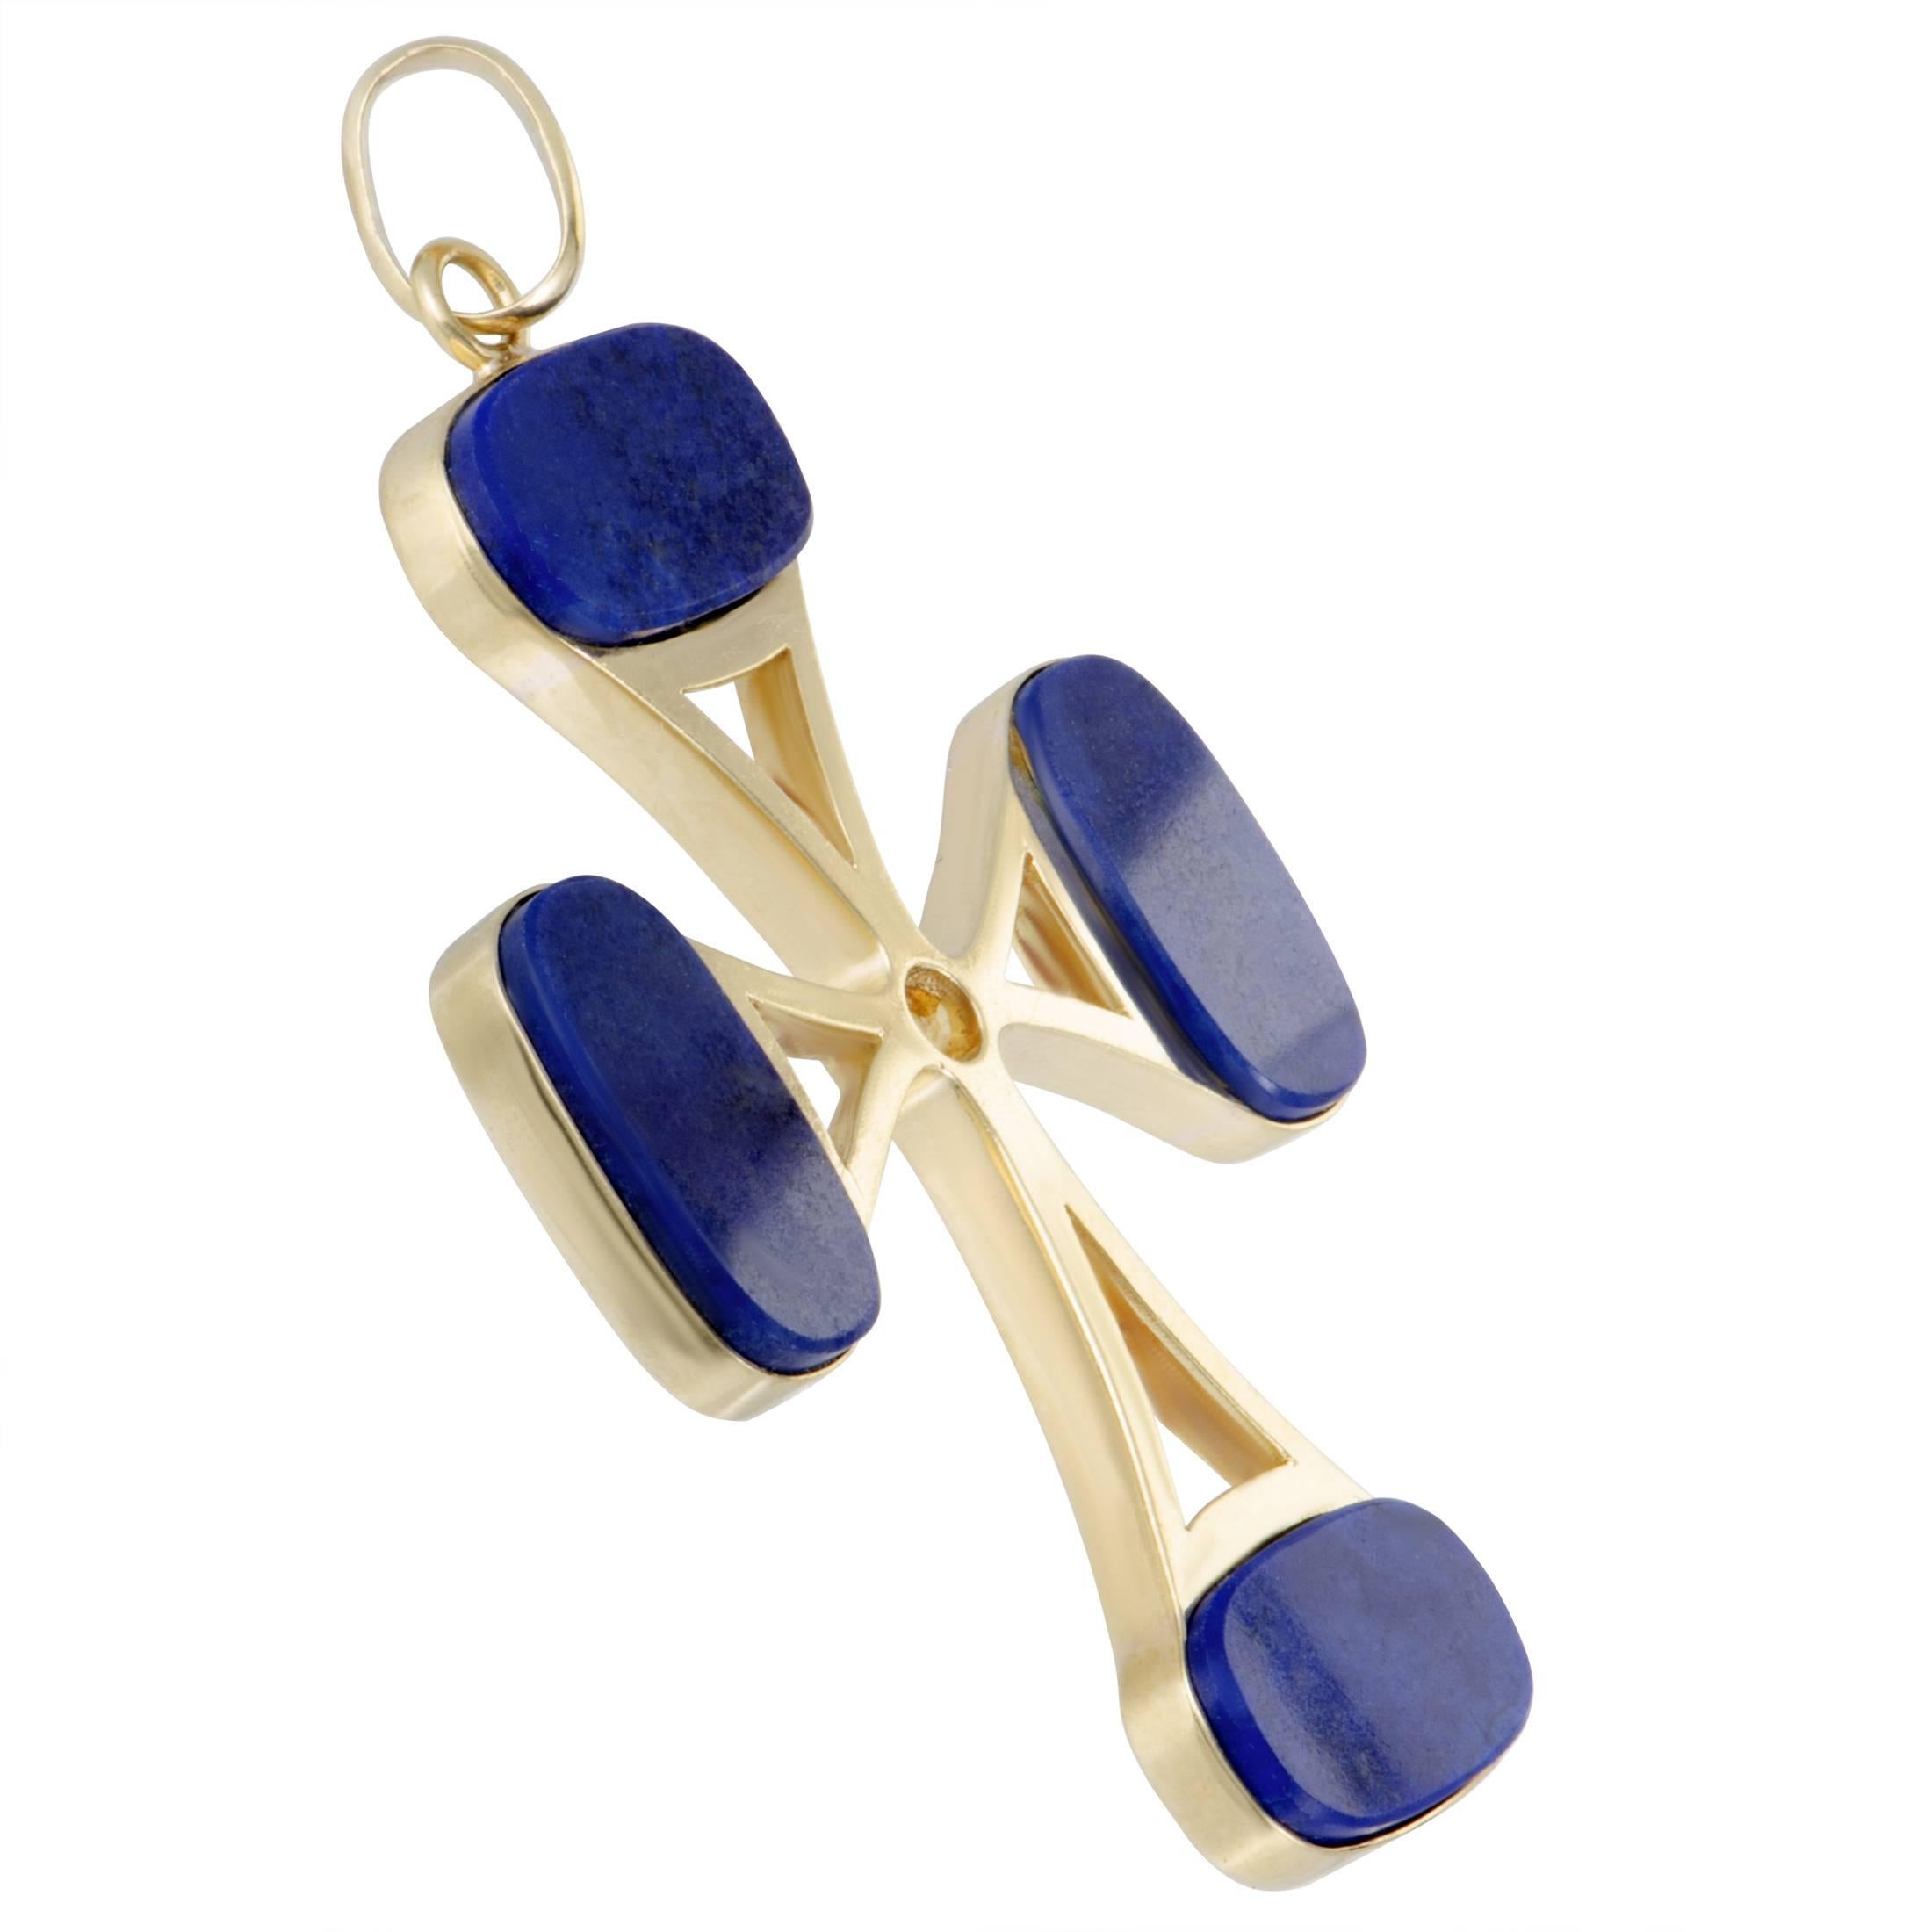 Captivating aesthetics and powerful symbolism are combined in this cross pendant into creating a piece of stunning visual appeal. The pendant is made of radiant 18K yellow gold and features four eye-catching lapis lazuli stones.